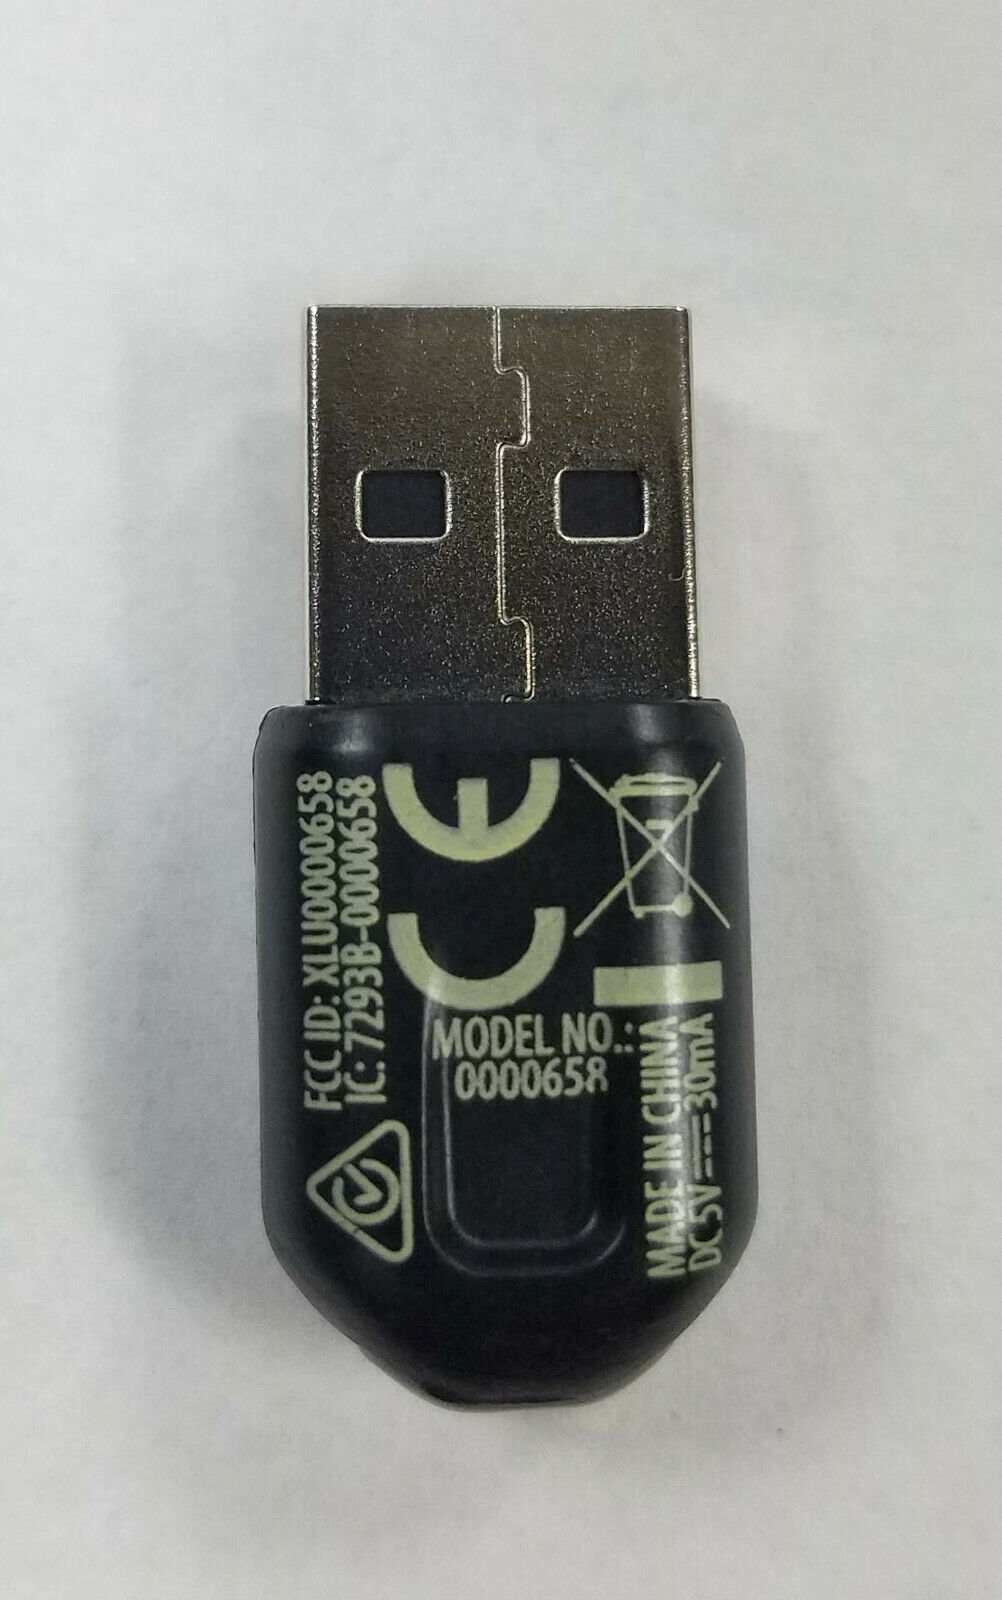 guitar hero live dongle replacement